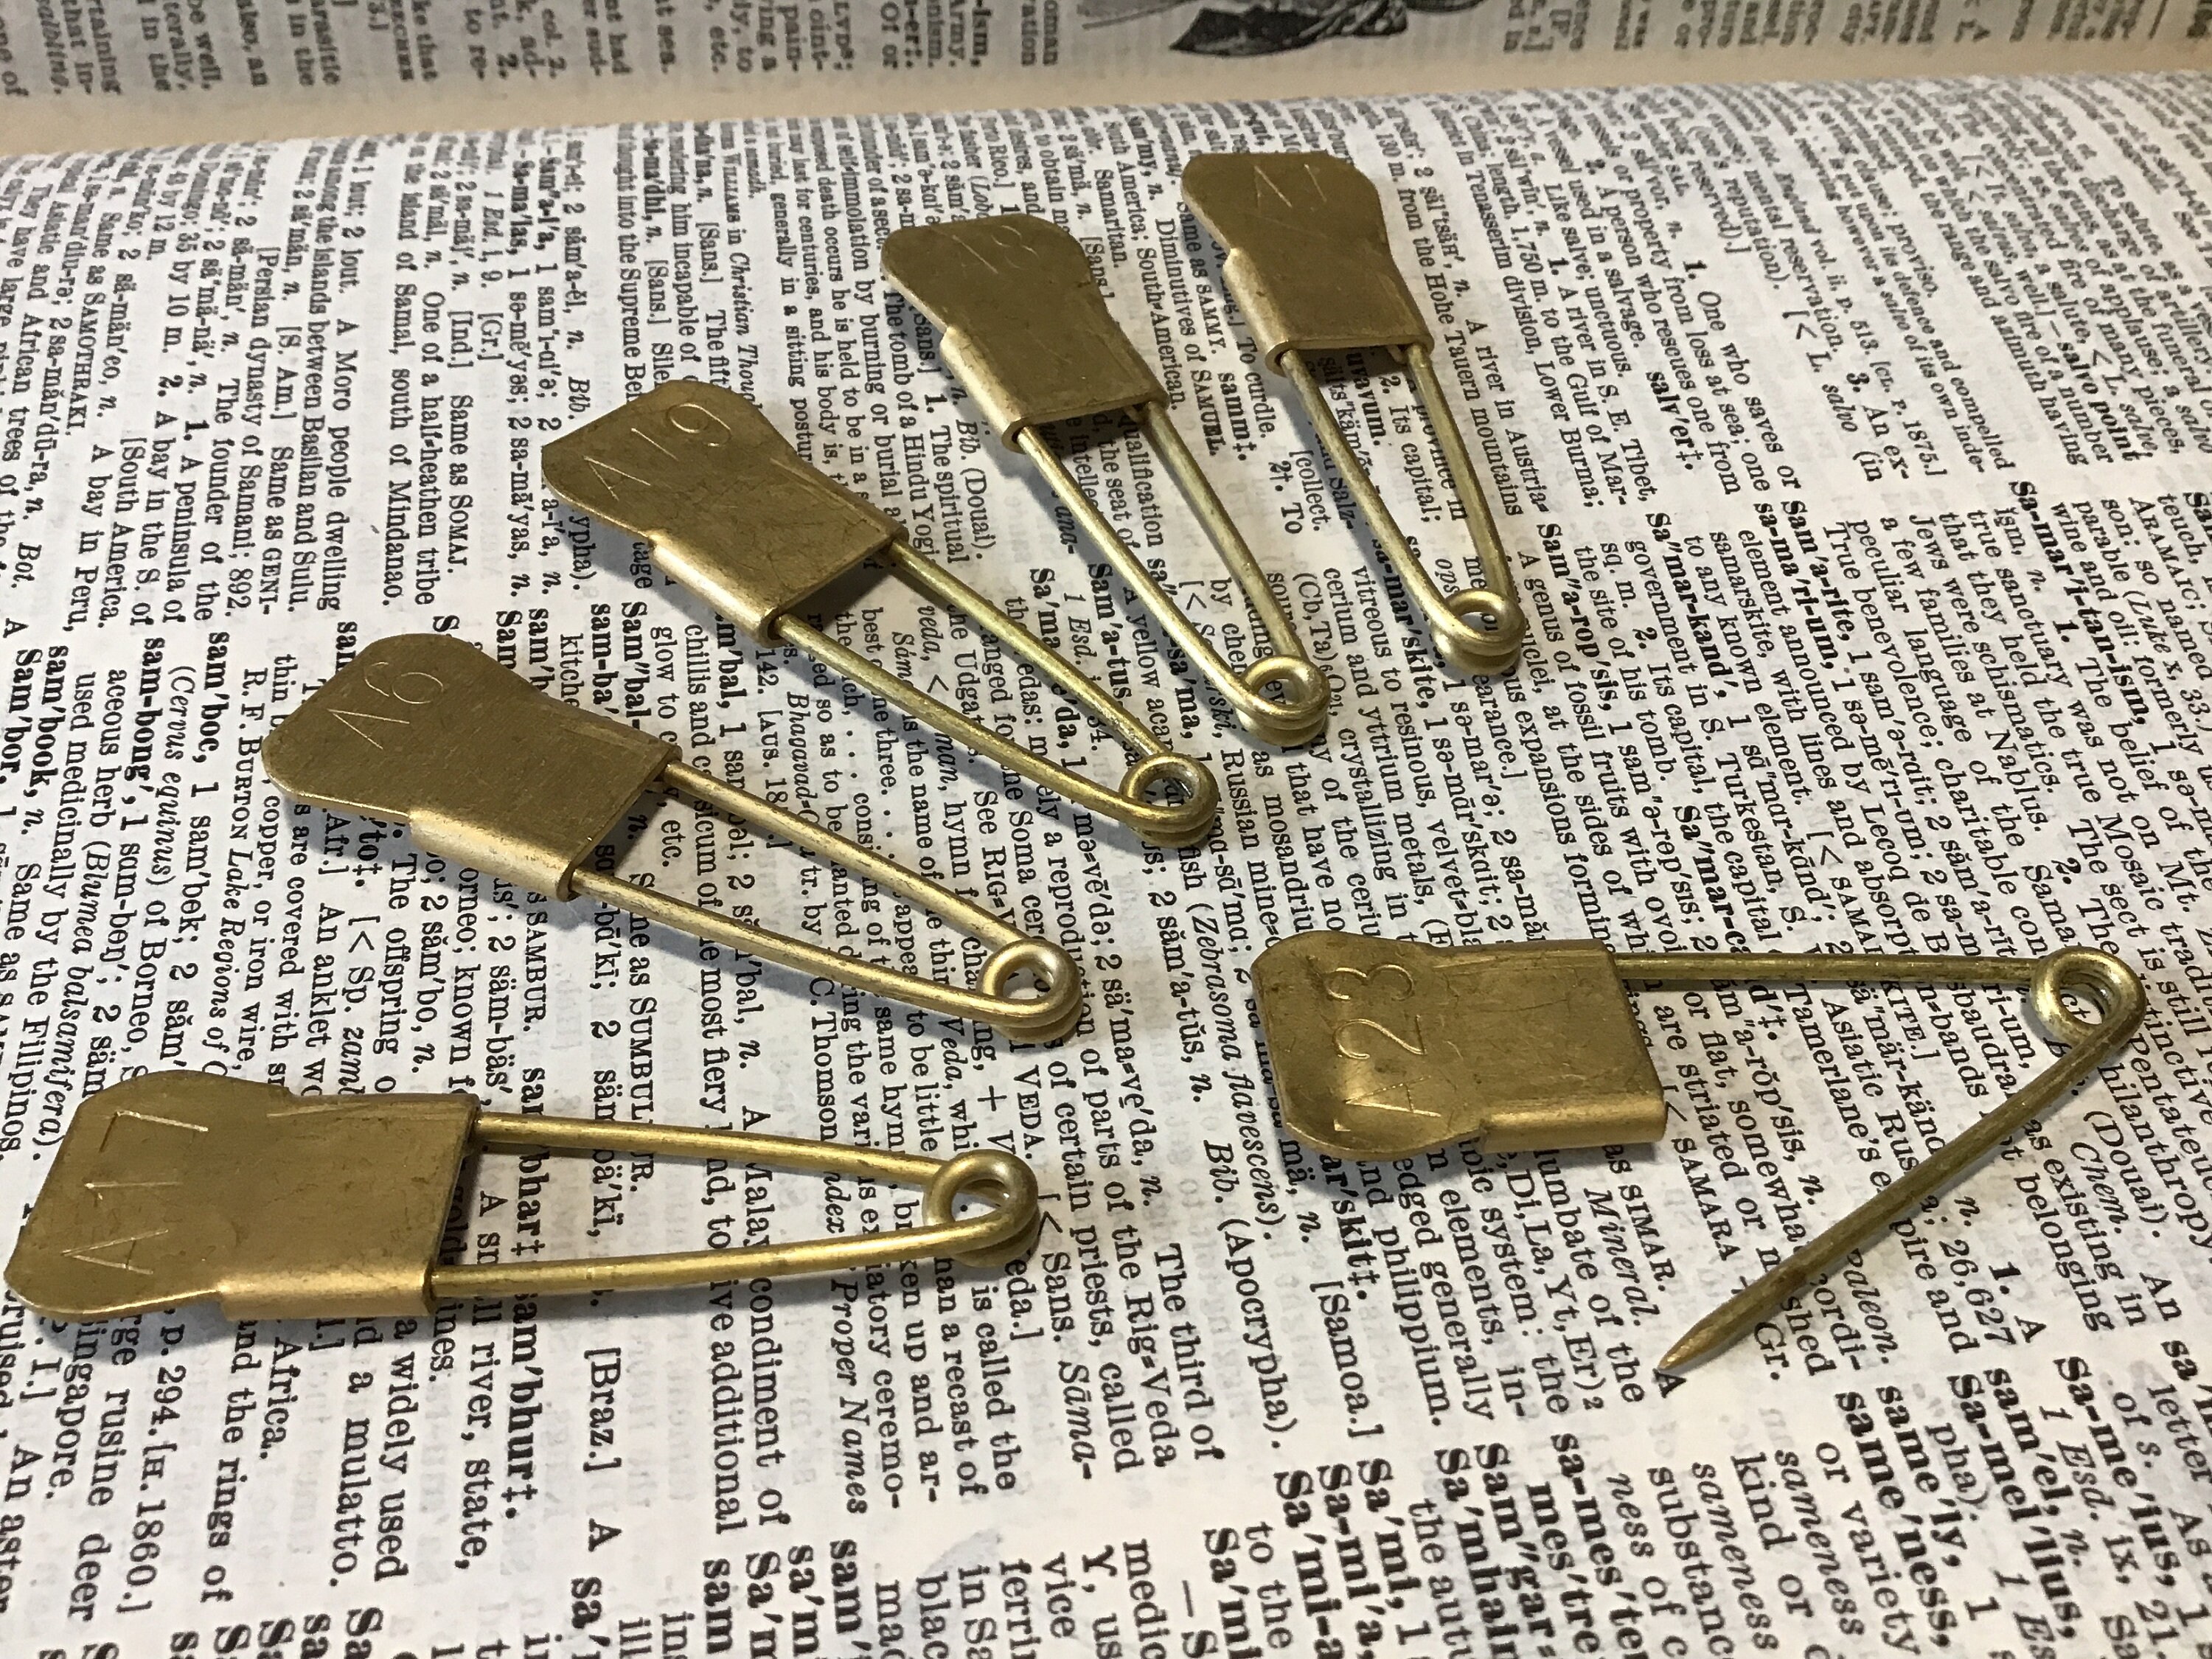 1000's Vintage Pins. Metal Advertising Pins From the 1960s. No Tin and  Plastic Pins, Only Metal Pins, Including Better Ones. 